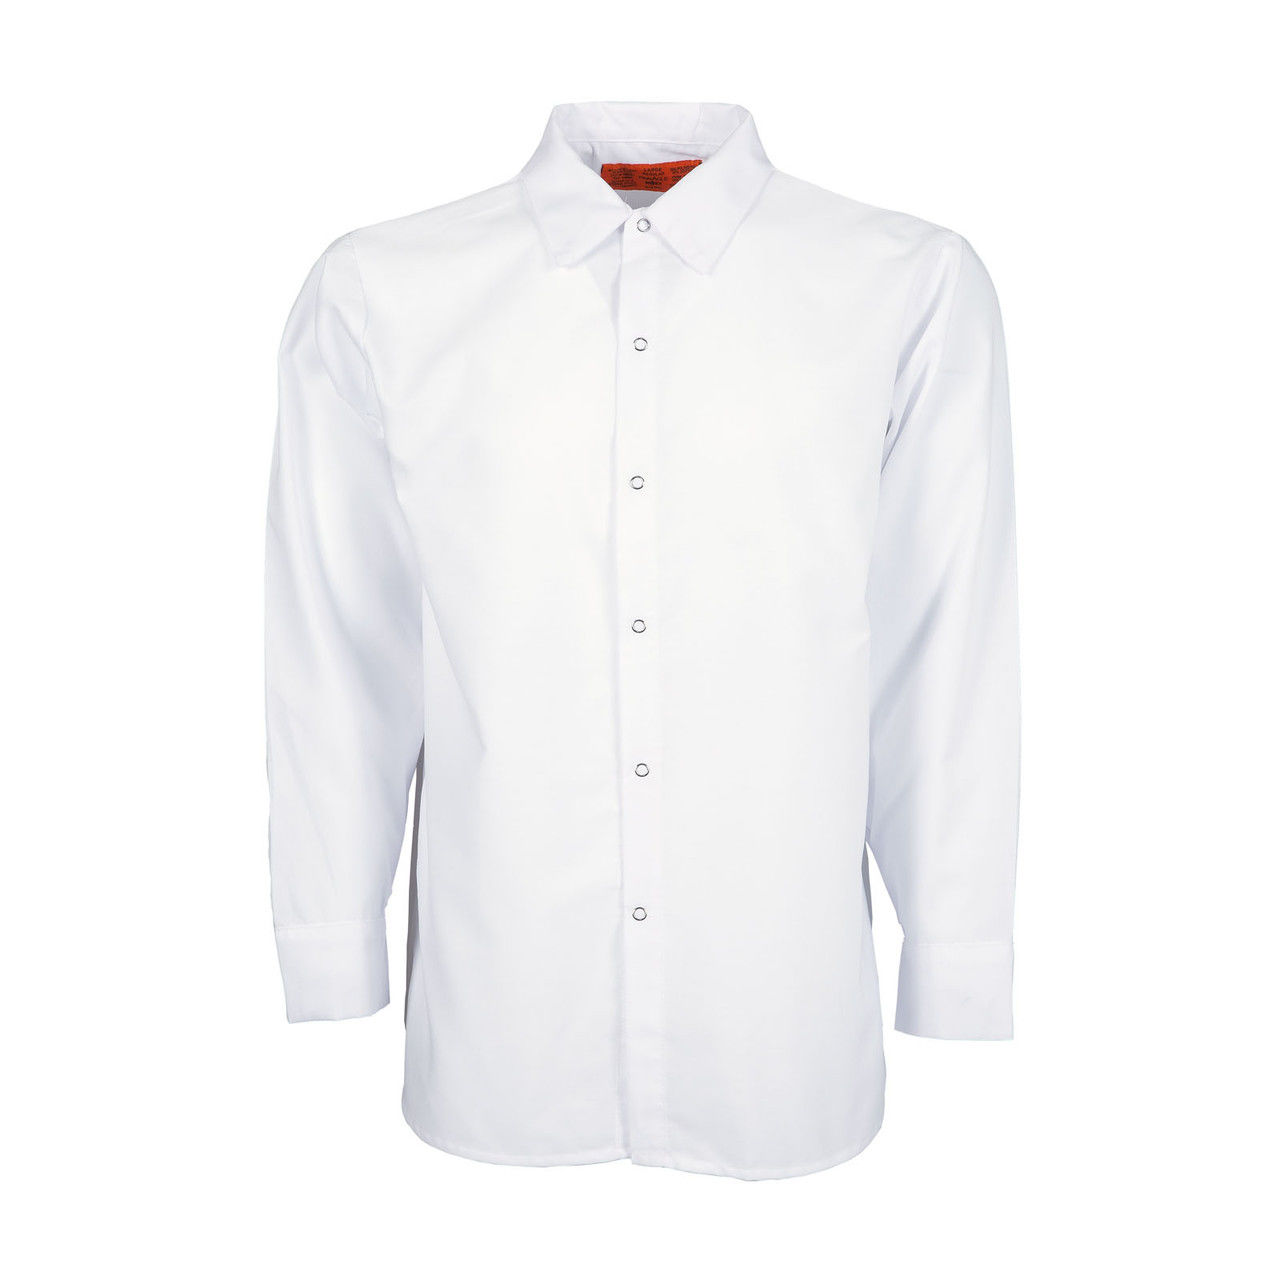 Why are white work shirts mens perfect for industrial work?